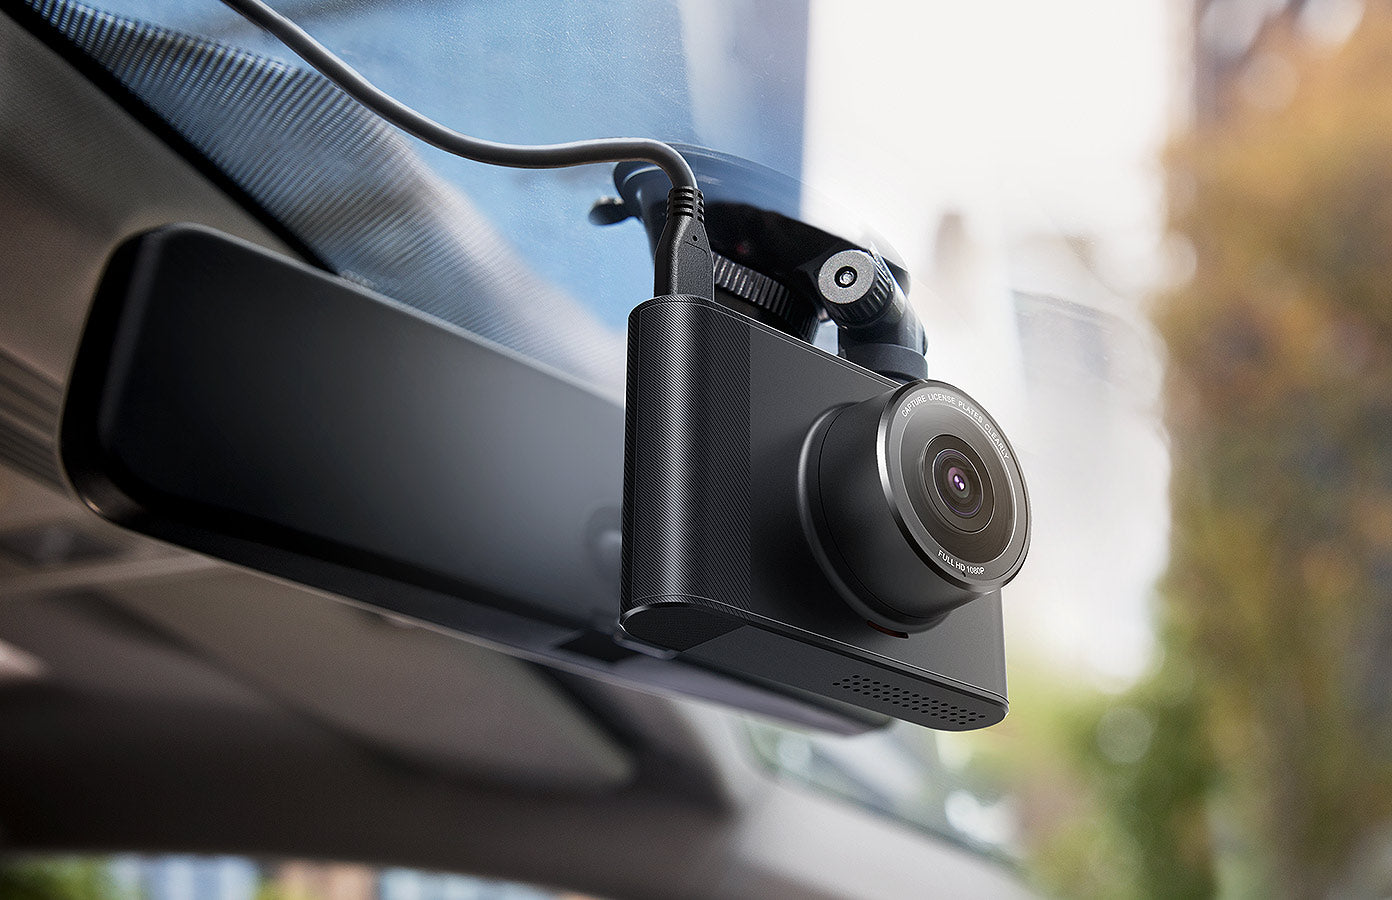 East-West Brothers Garage: Product Review: Anker Roav Dashcam A1